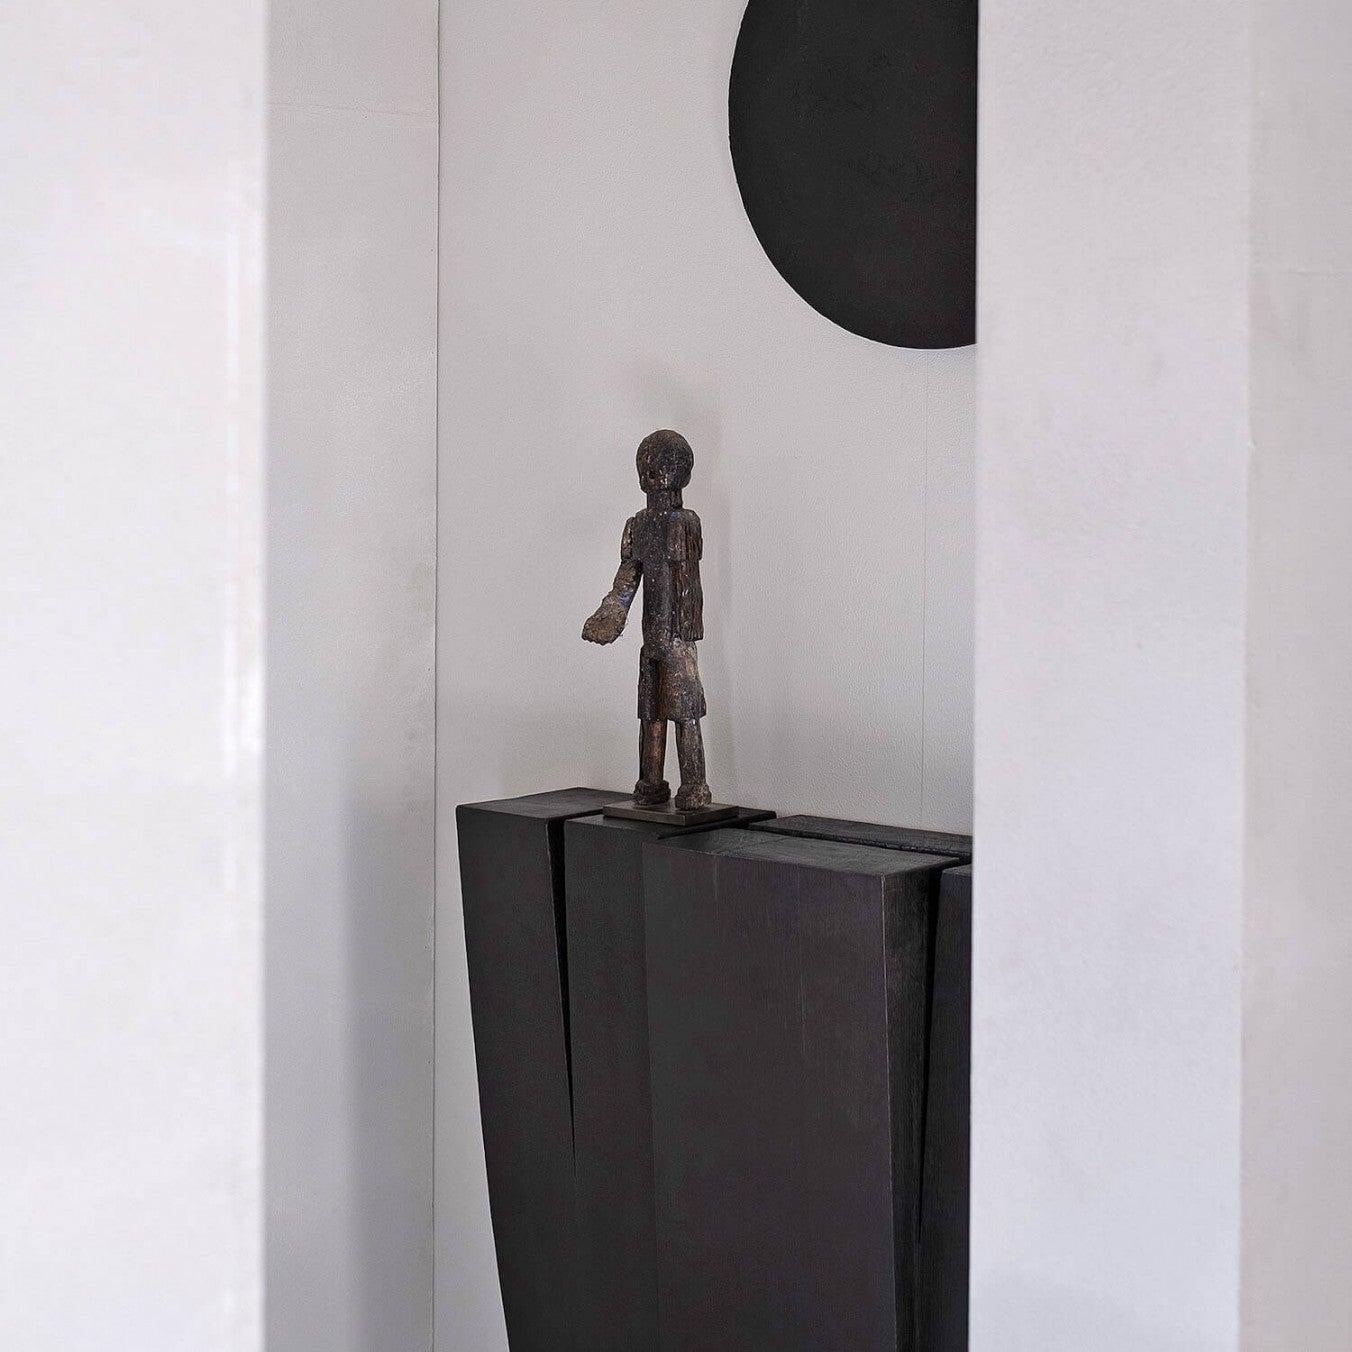 Hallway console table, signed by Arno Declercq
Measures:
90 cm L x 25 cm W x 90 cm H
35.5” L x 9.8” W x 35.5” H
Material: Iroko wood
Signed by Arno Declercq

Iroko wood and oak grey stone by Van Den Weghe
Different stones